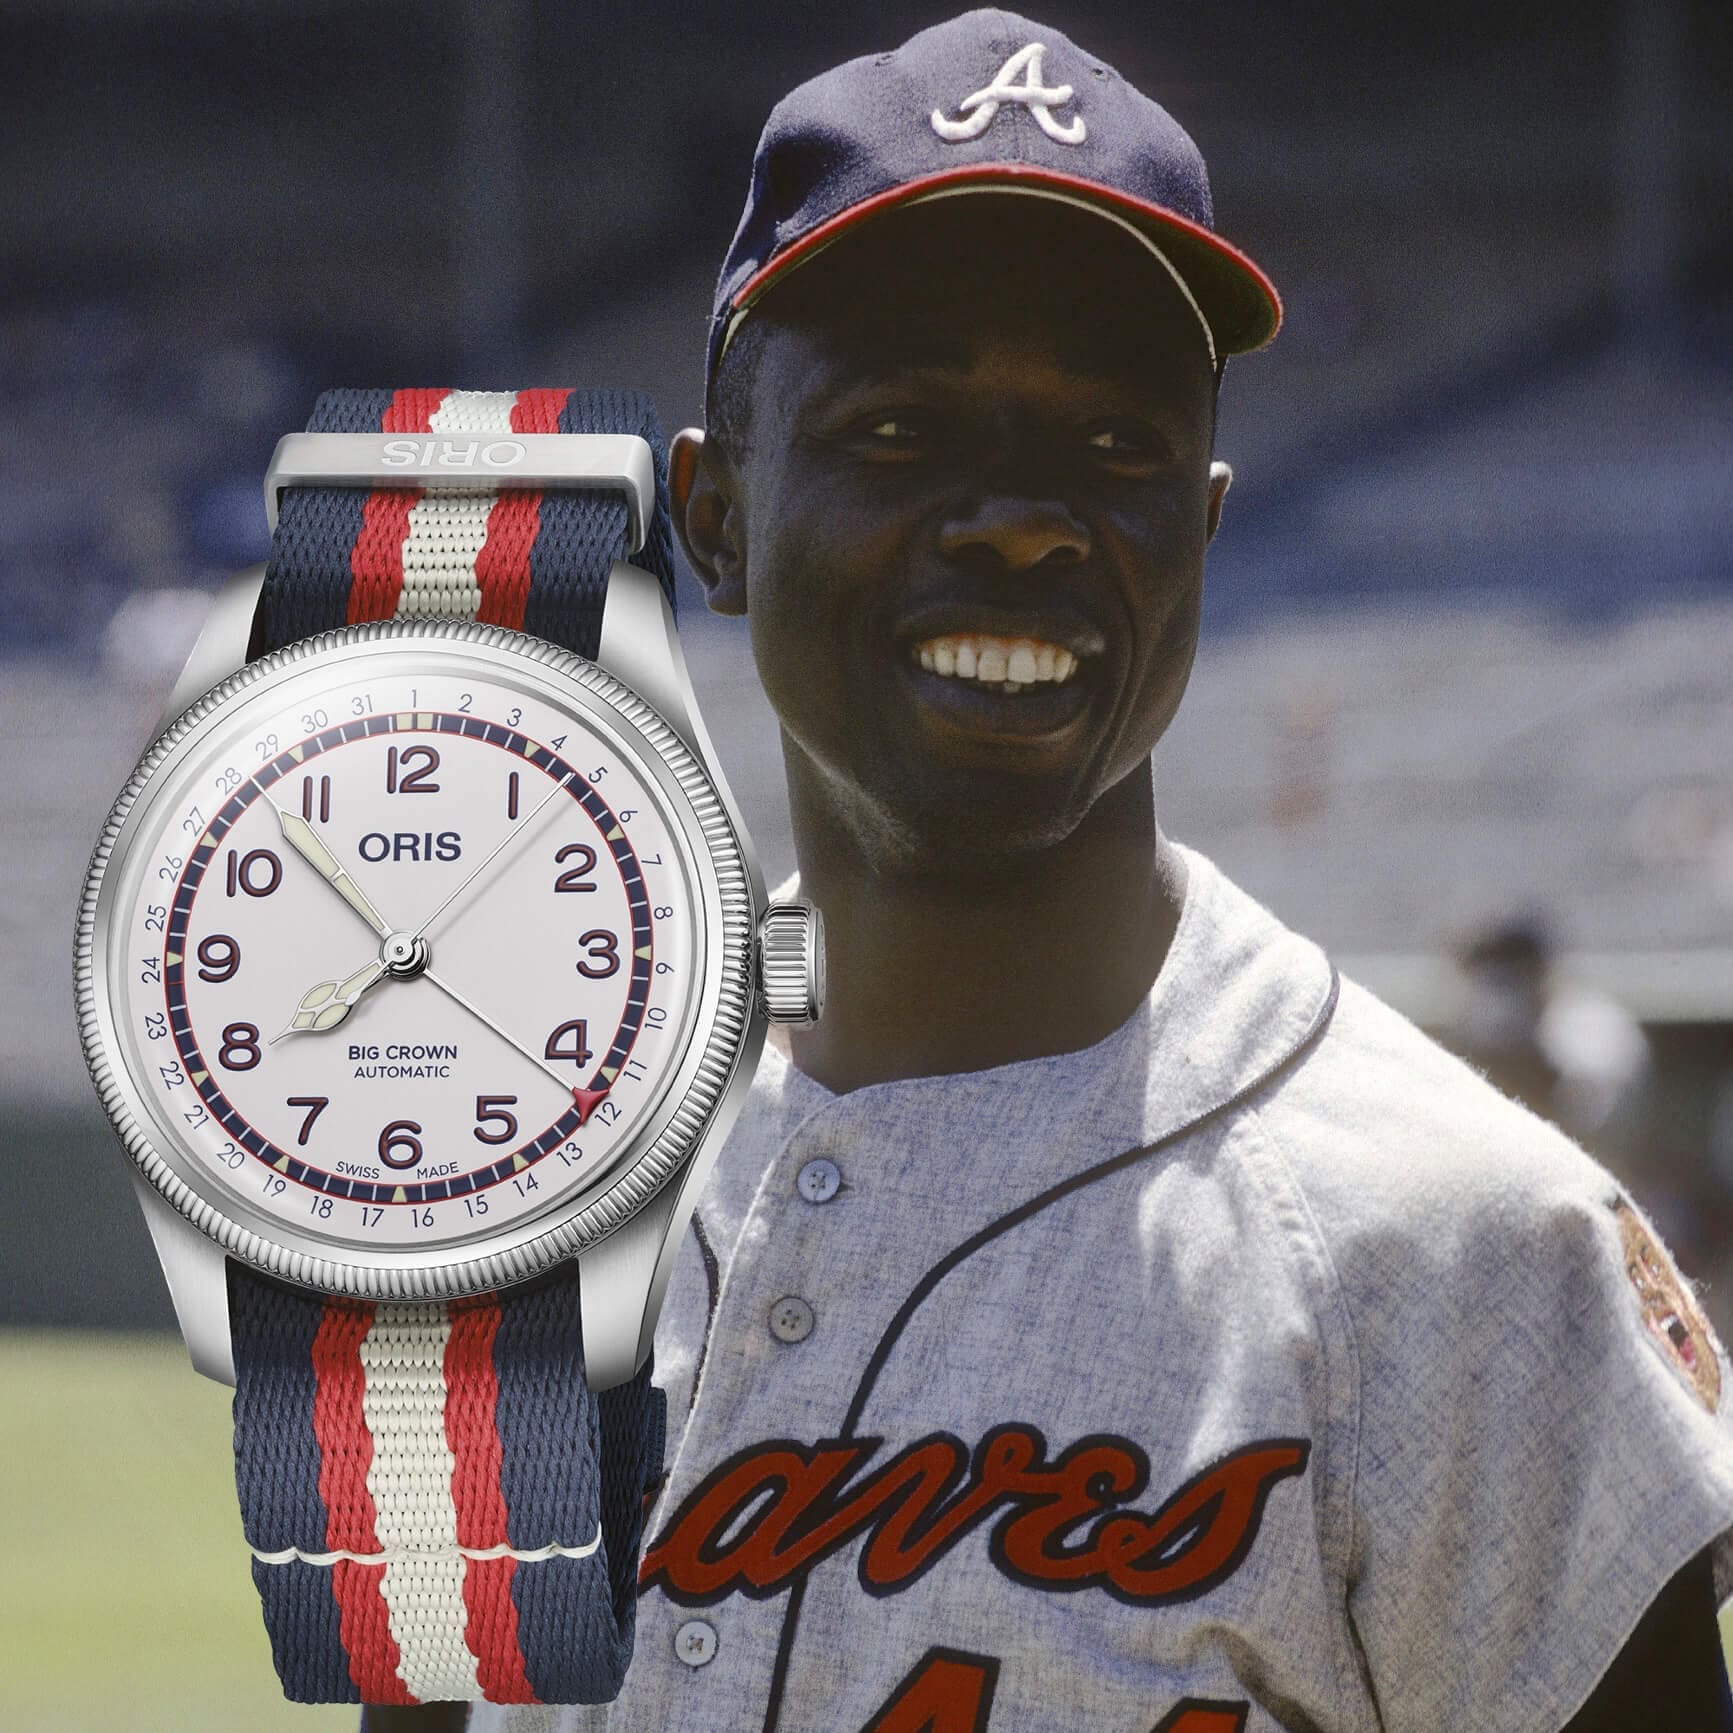 The new Oris Hank Aaron Limited Edition is a charitable home run